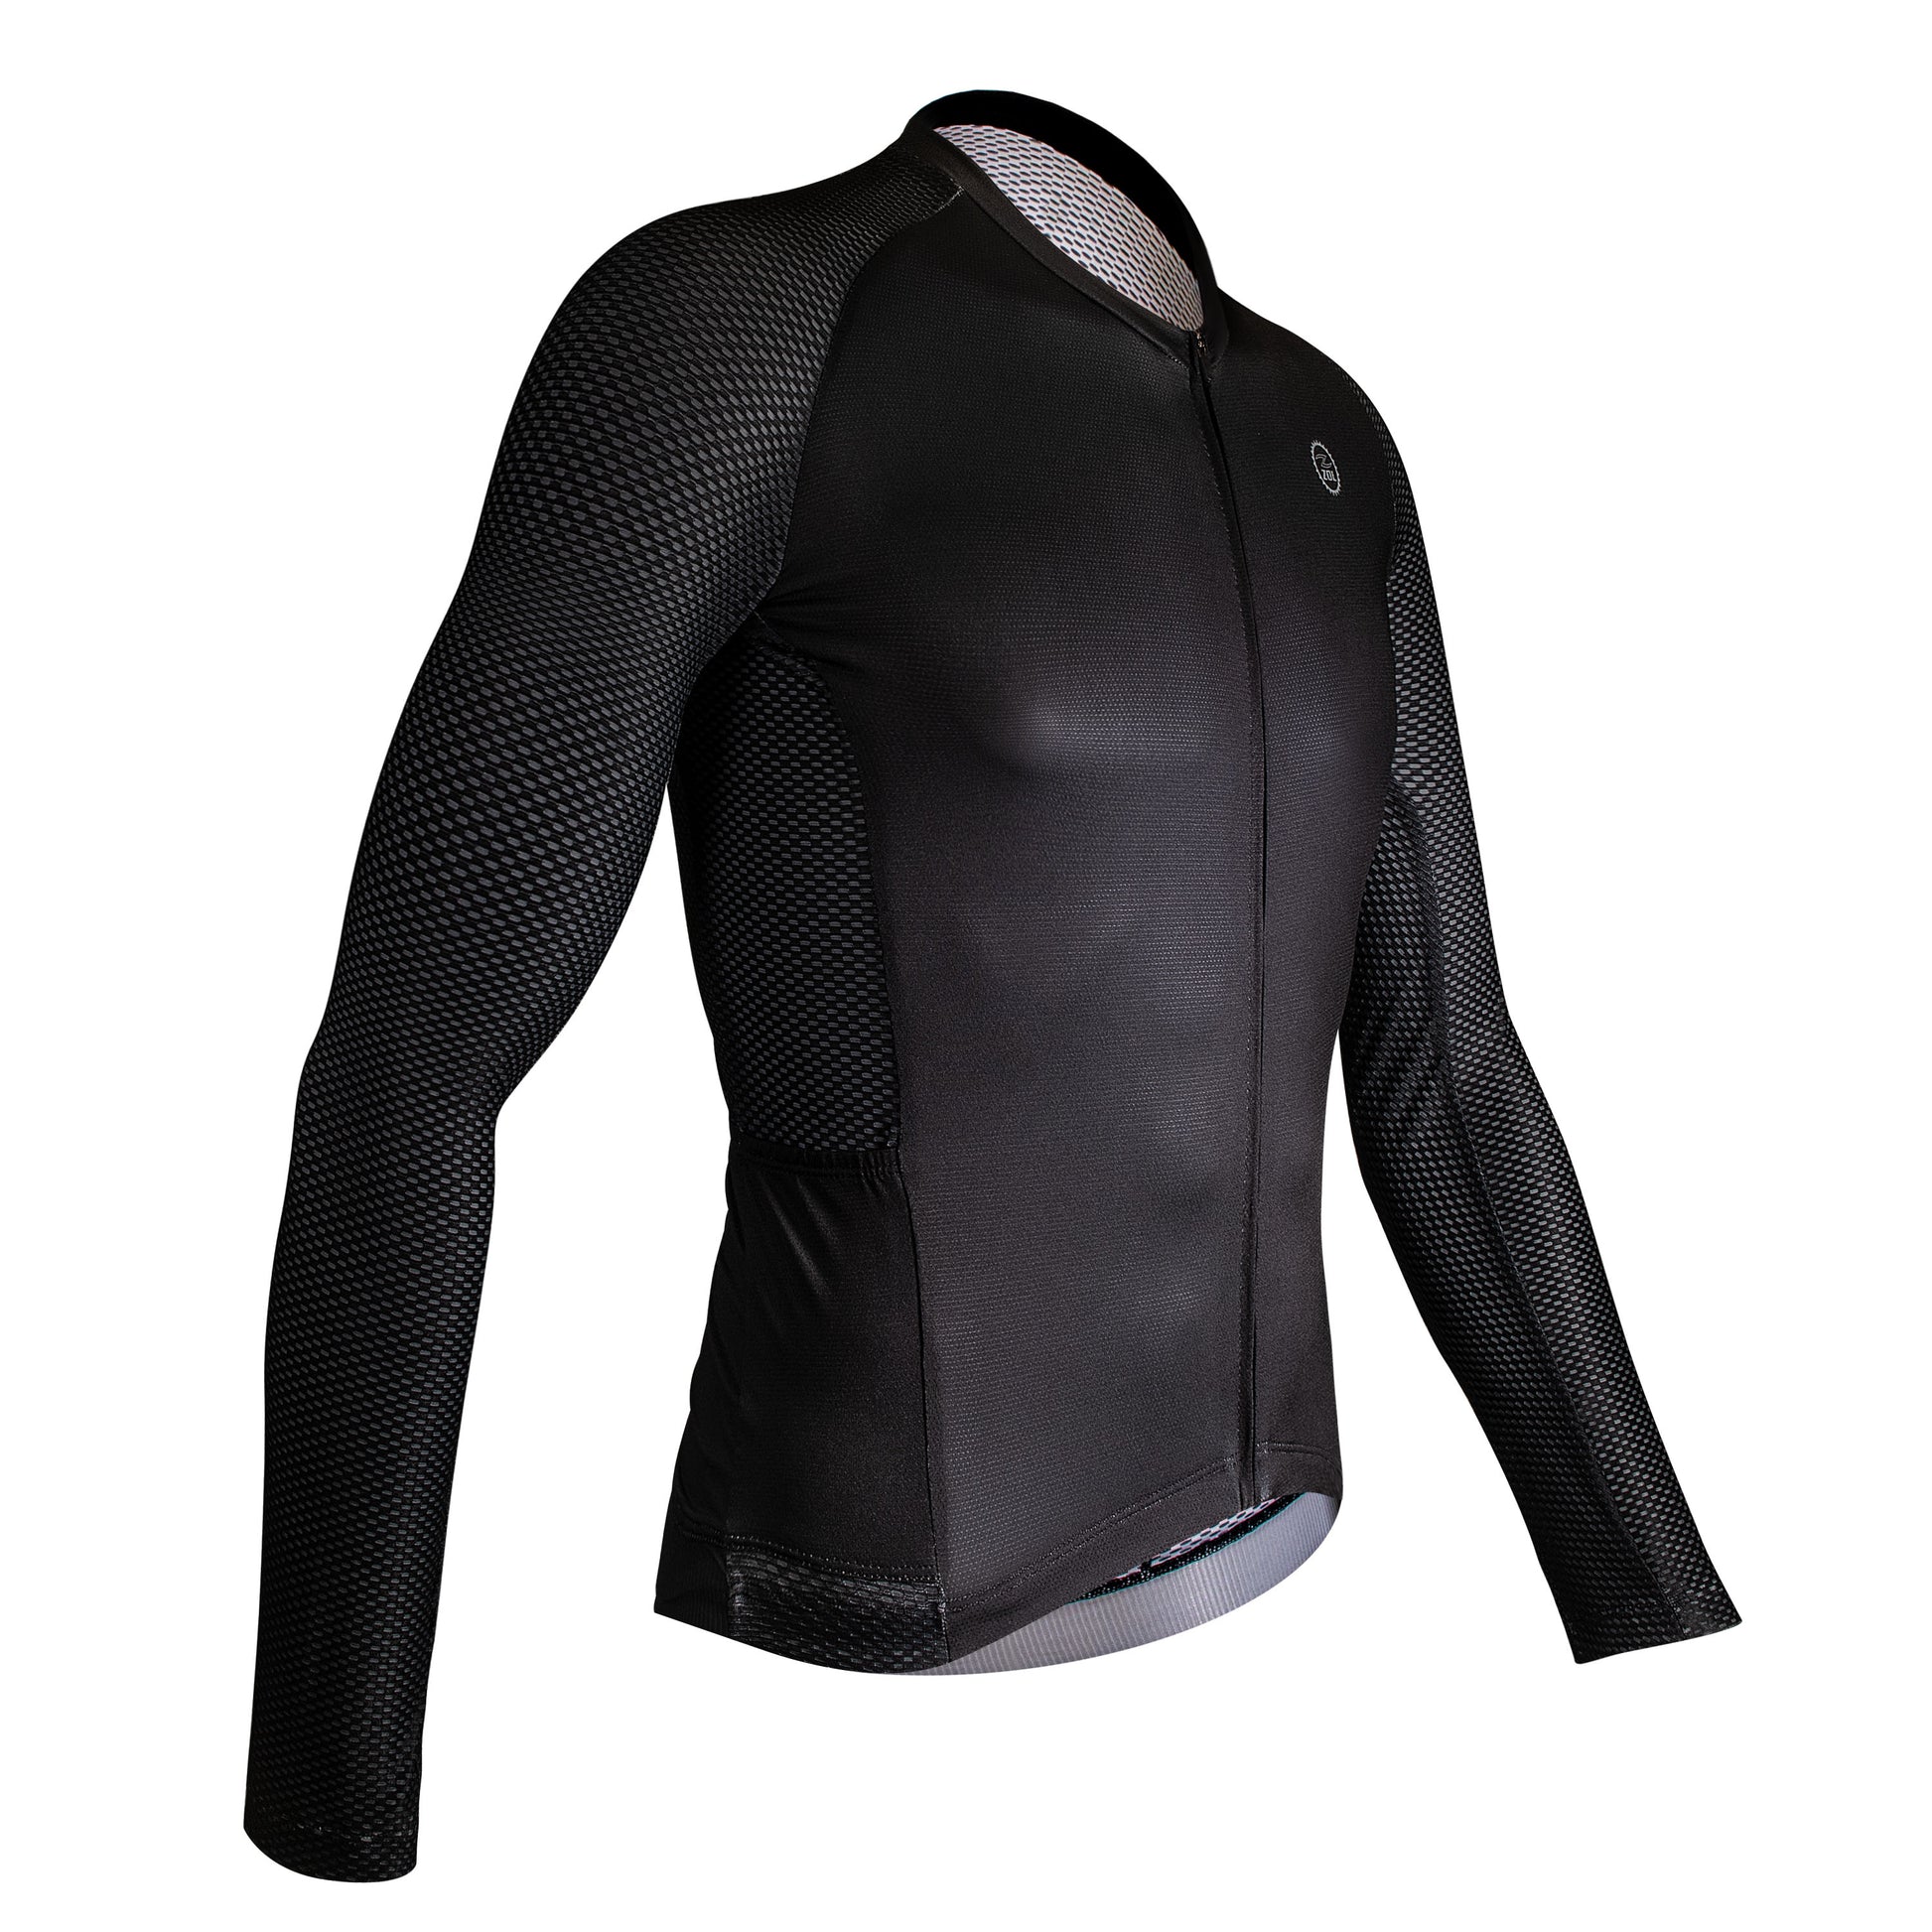 Zol Cycling Black Long Sleeve Breathable Race Fit Jersey (Men's) - Zol Cycling